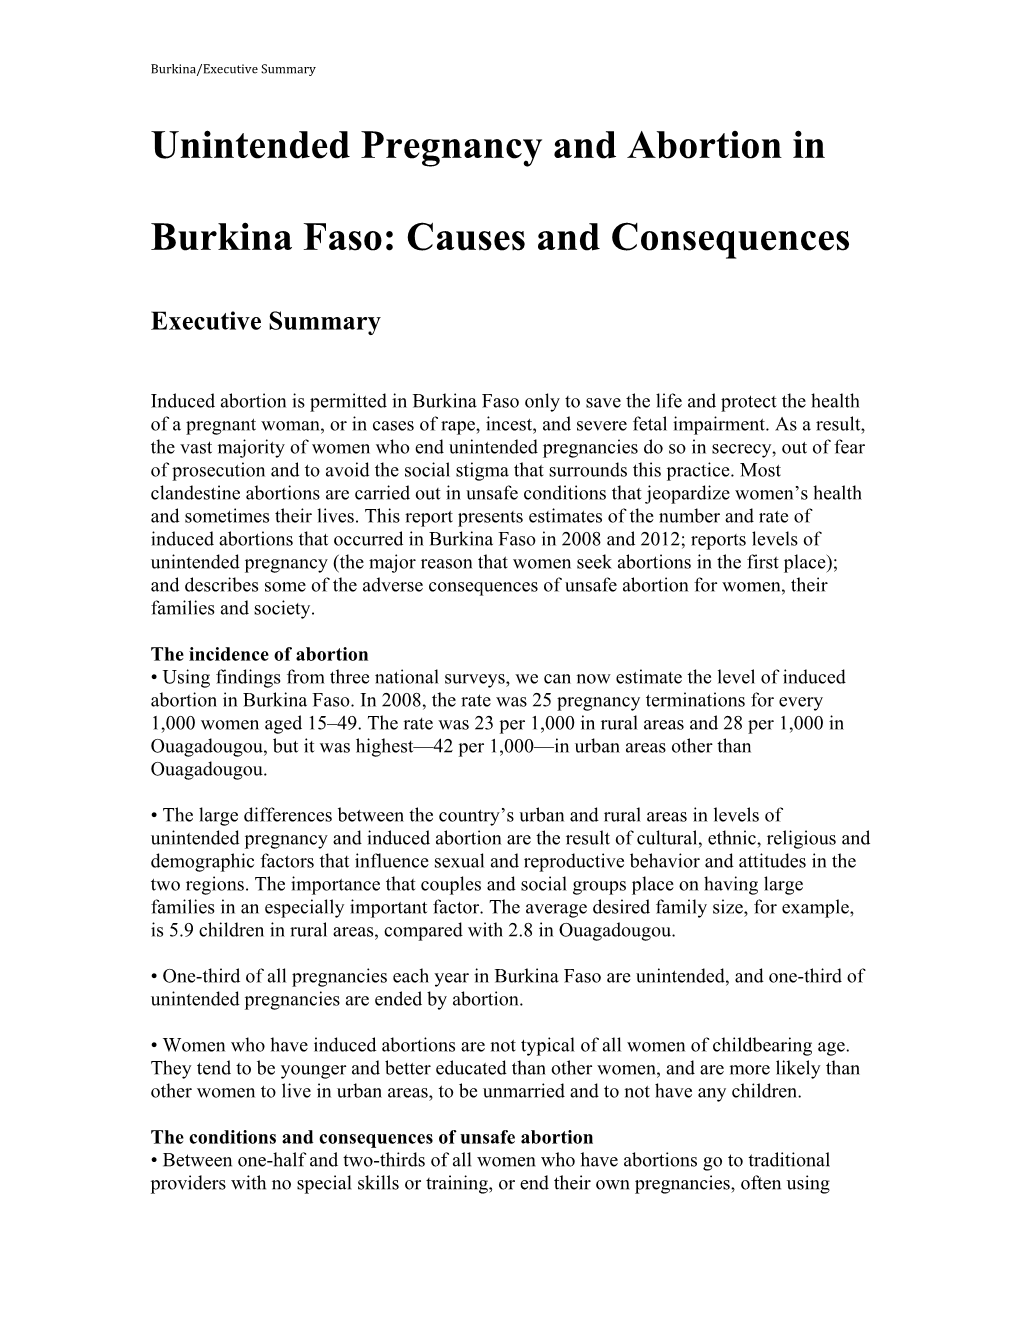 Unintended Pregnancy and Abortion in Burkina Faso: Causes And